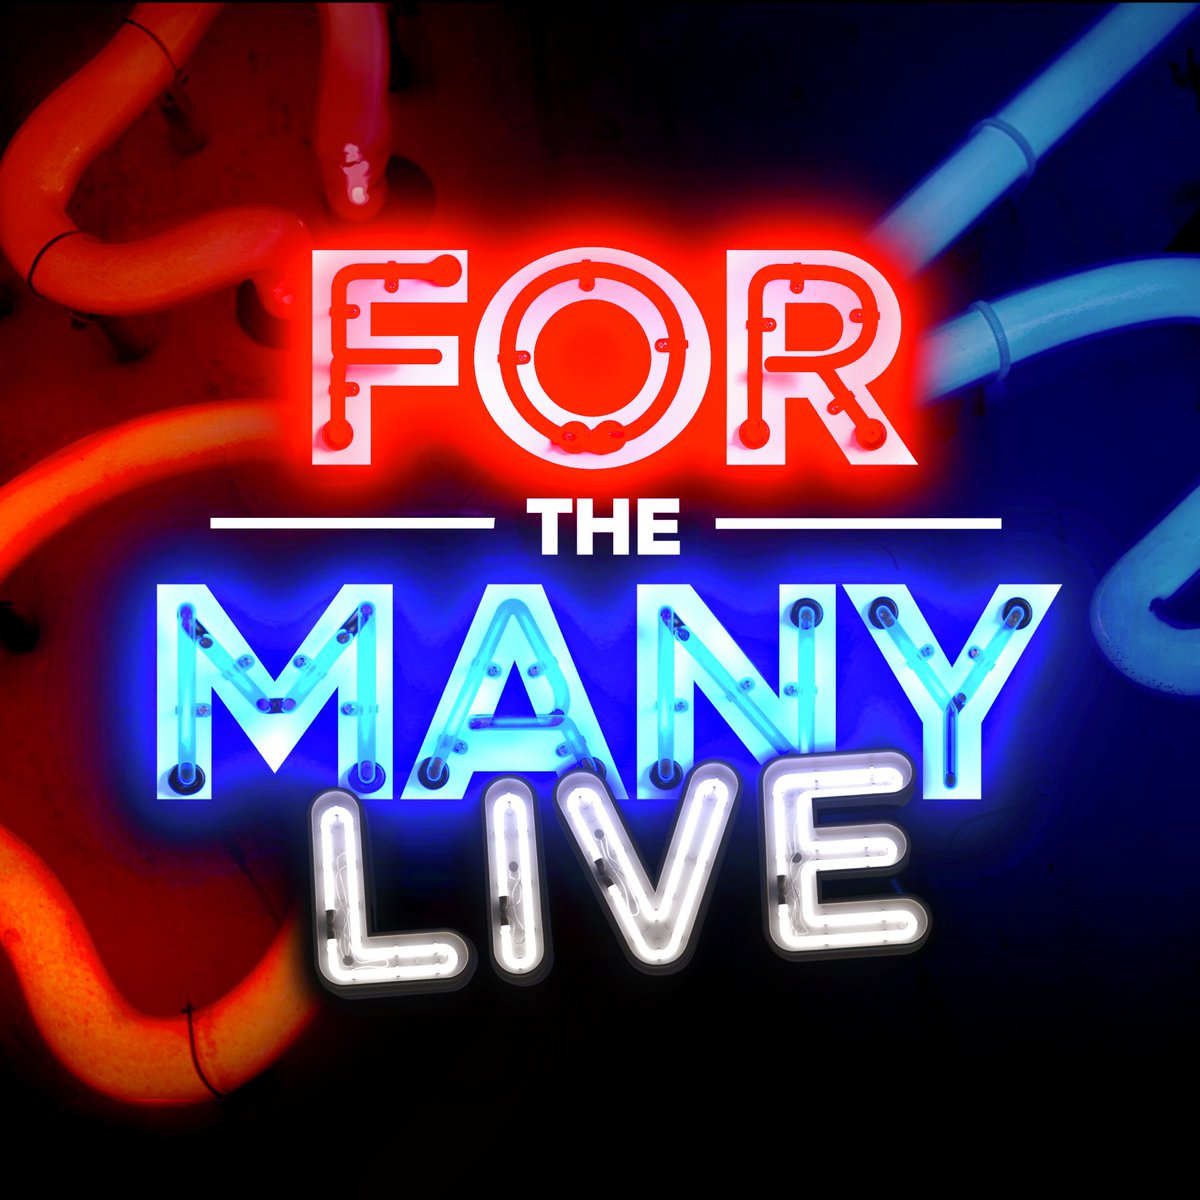 FOR THE MANY LIVE! AT THE EDINBURGH FRINGE 10-14 August with guests @fifiglover @janegarvey1 @mattforde @ArleneFosterUK @Douglas4Moray @AnasSarwar @GeoffNorcott Hosted by @IainDale & @Jacqui_smith1 Book tickets here pleasance.co.uk/via/search/edi…